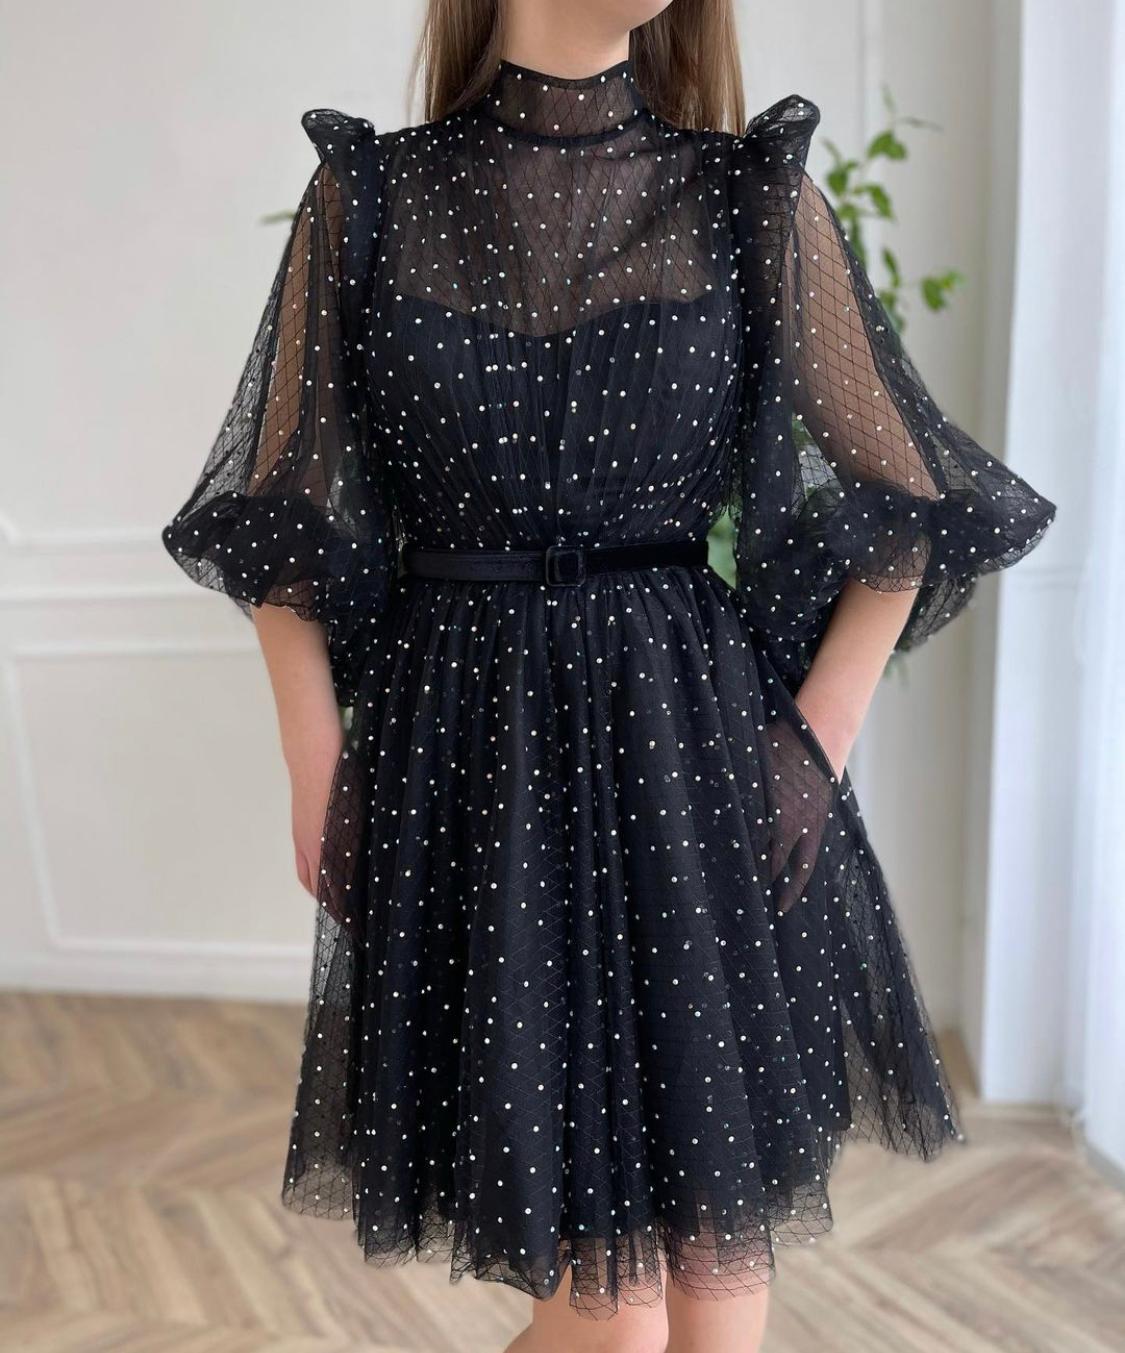 Black mini dotted dress with short sleeves